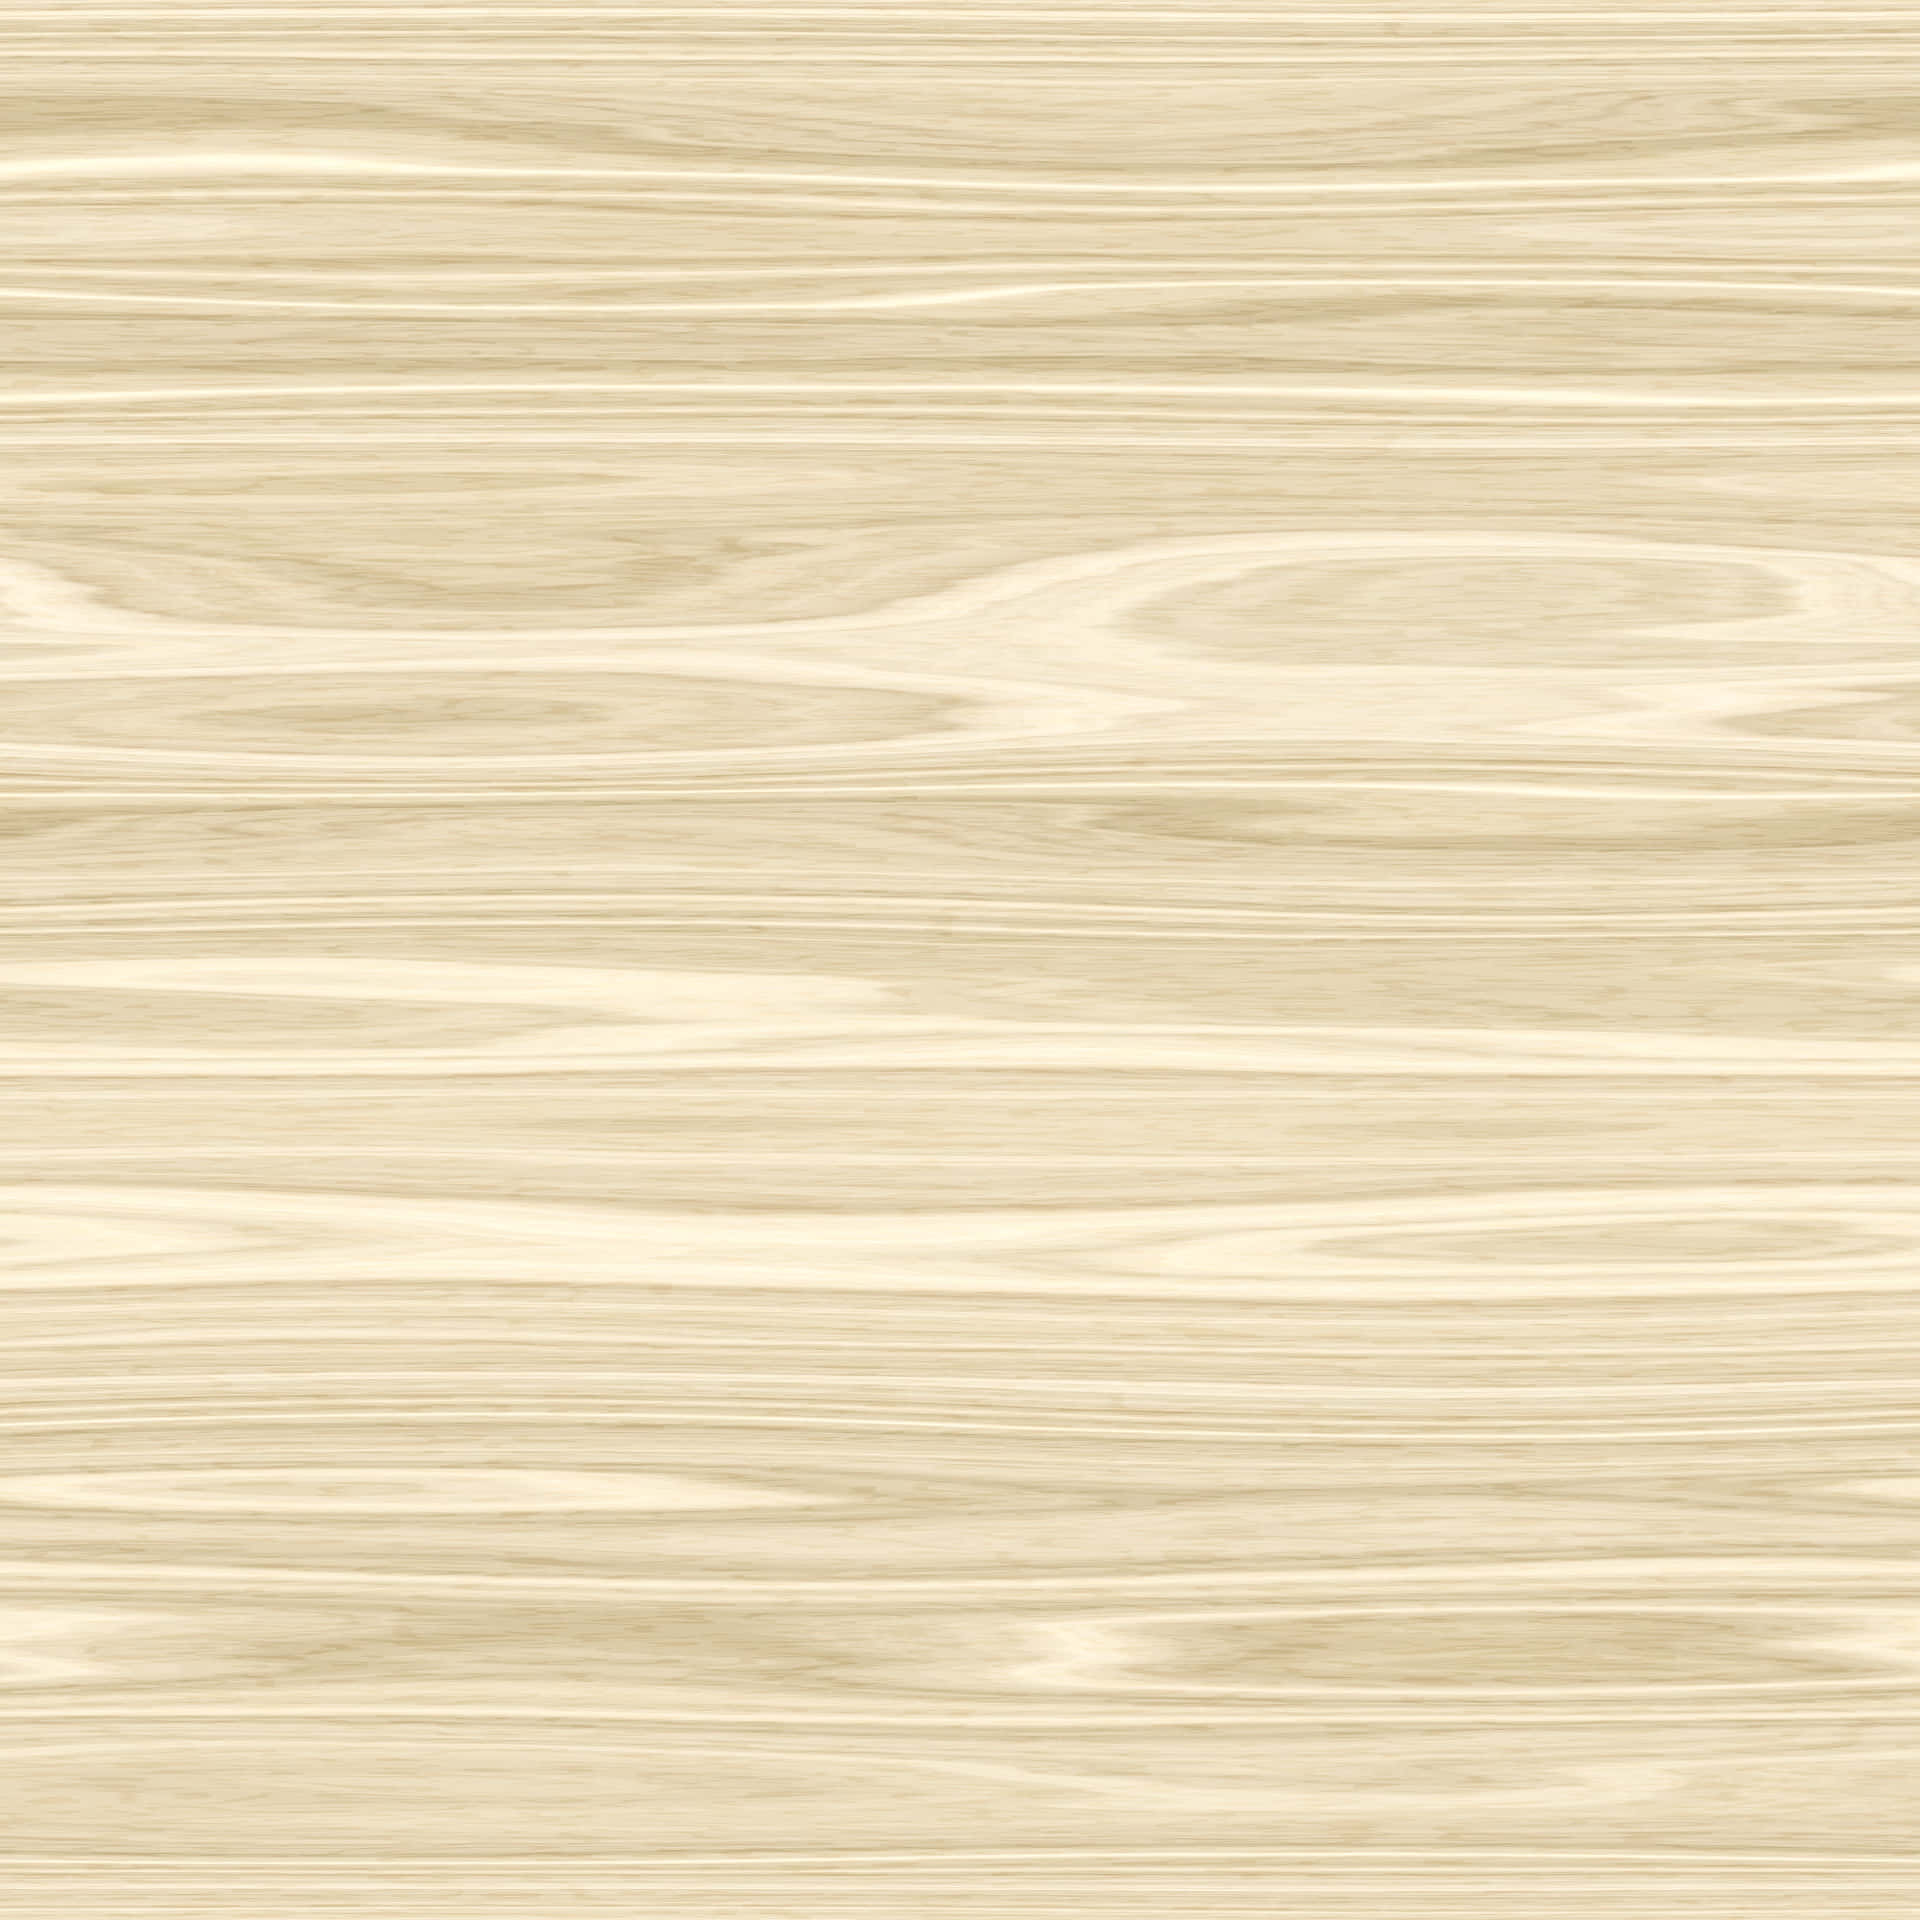 A beautiful high resolution wood background.